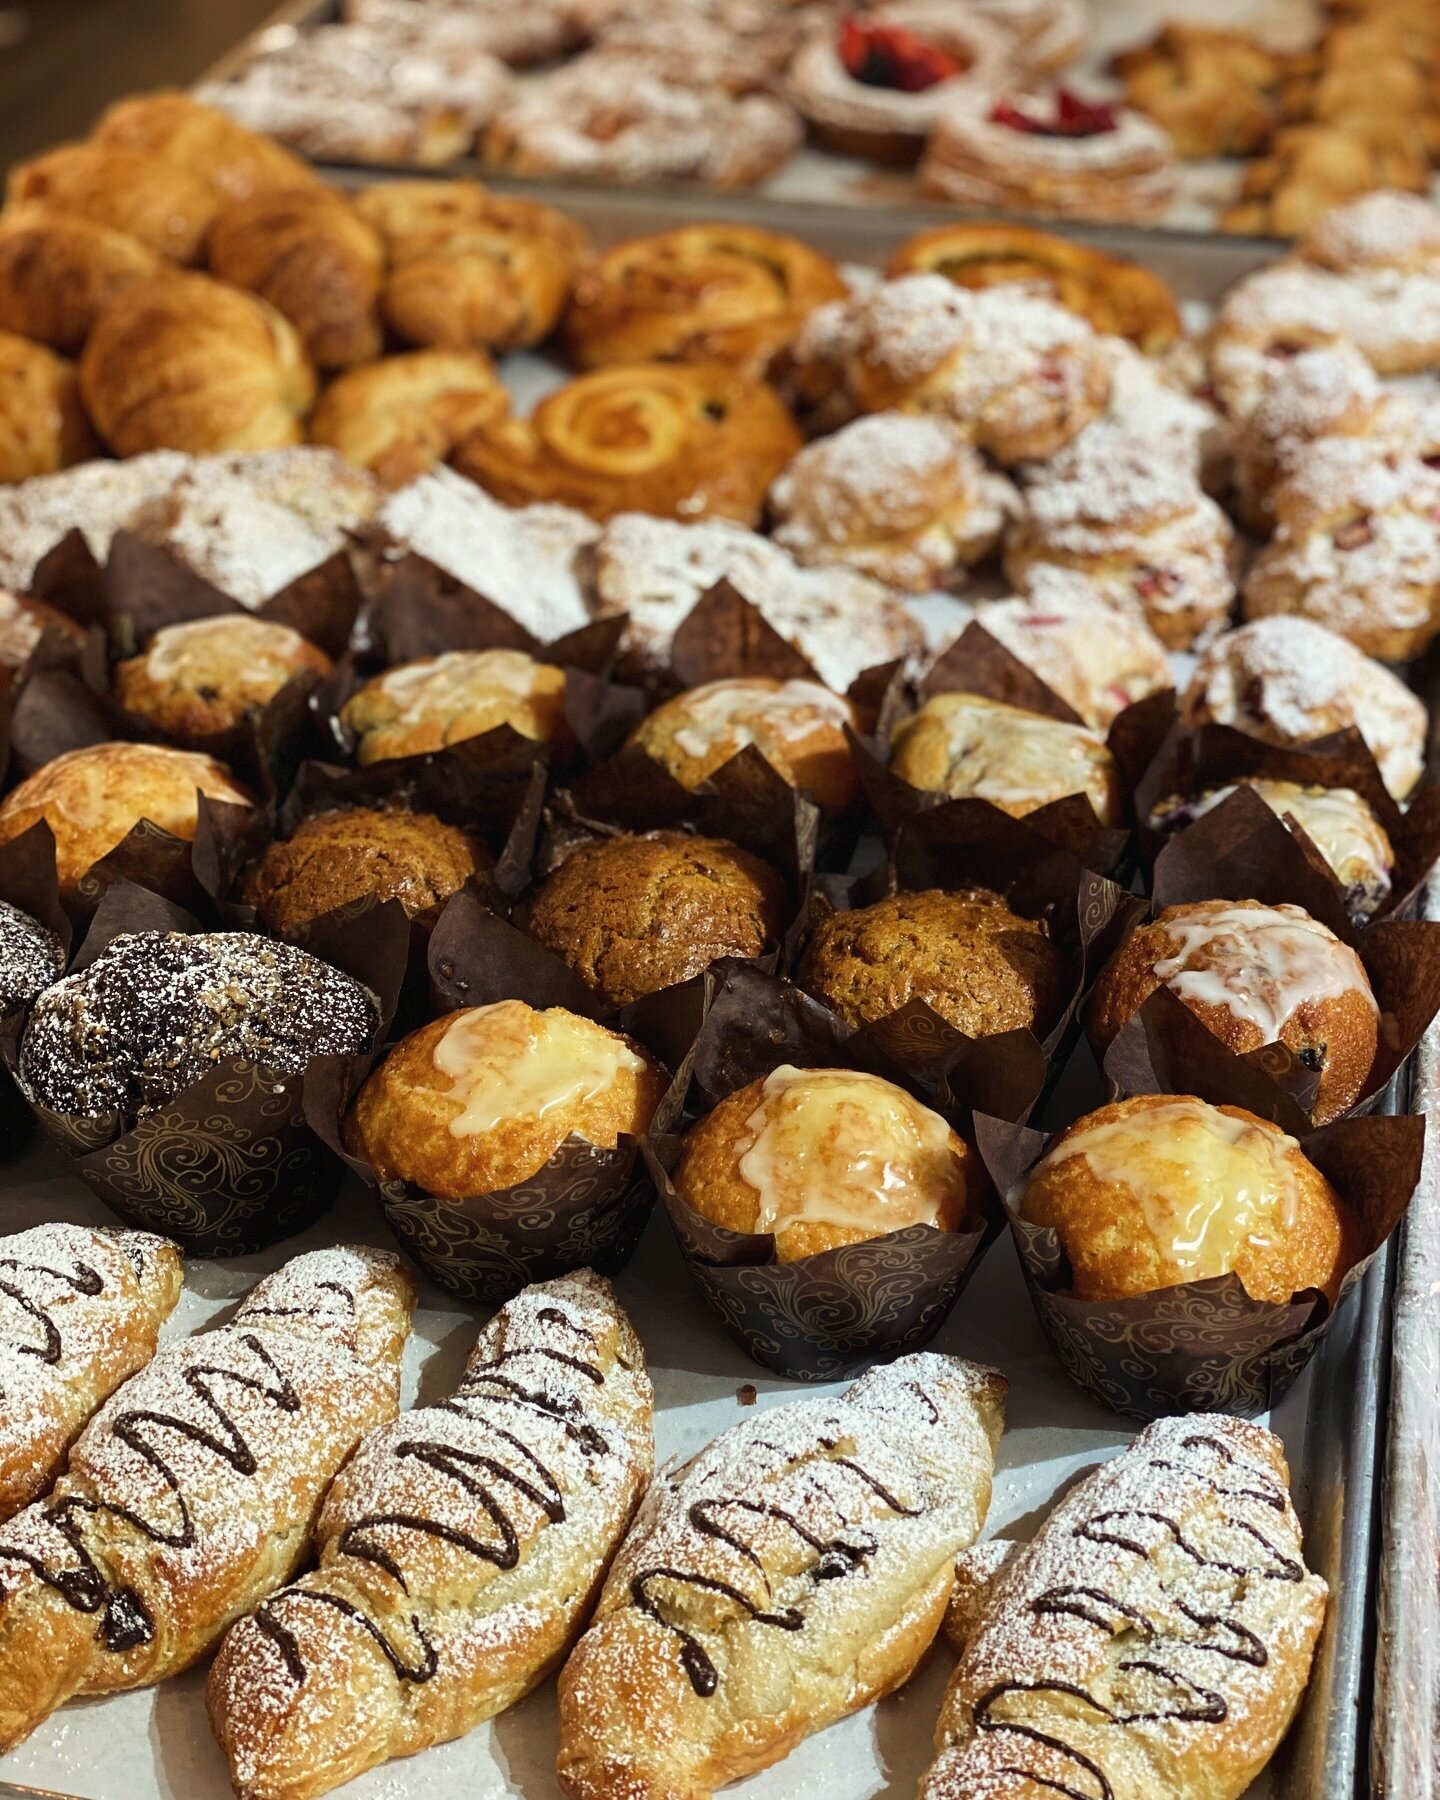 Stop in The Marketplace for coffee and loads of fresh baked pastries 🥐